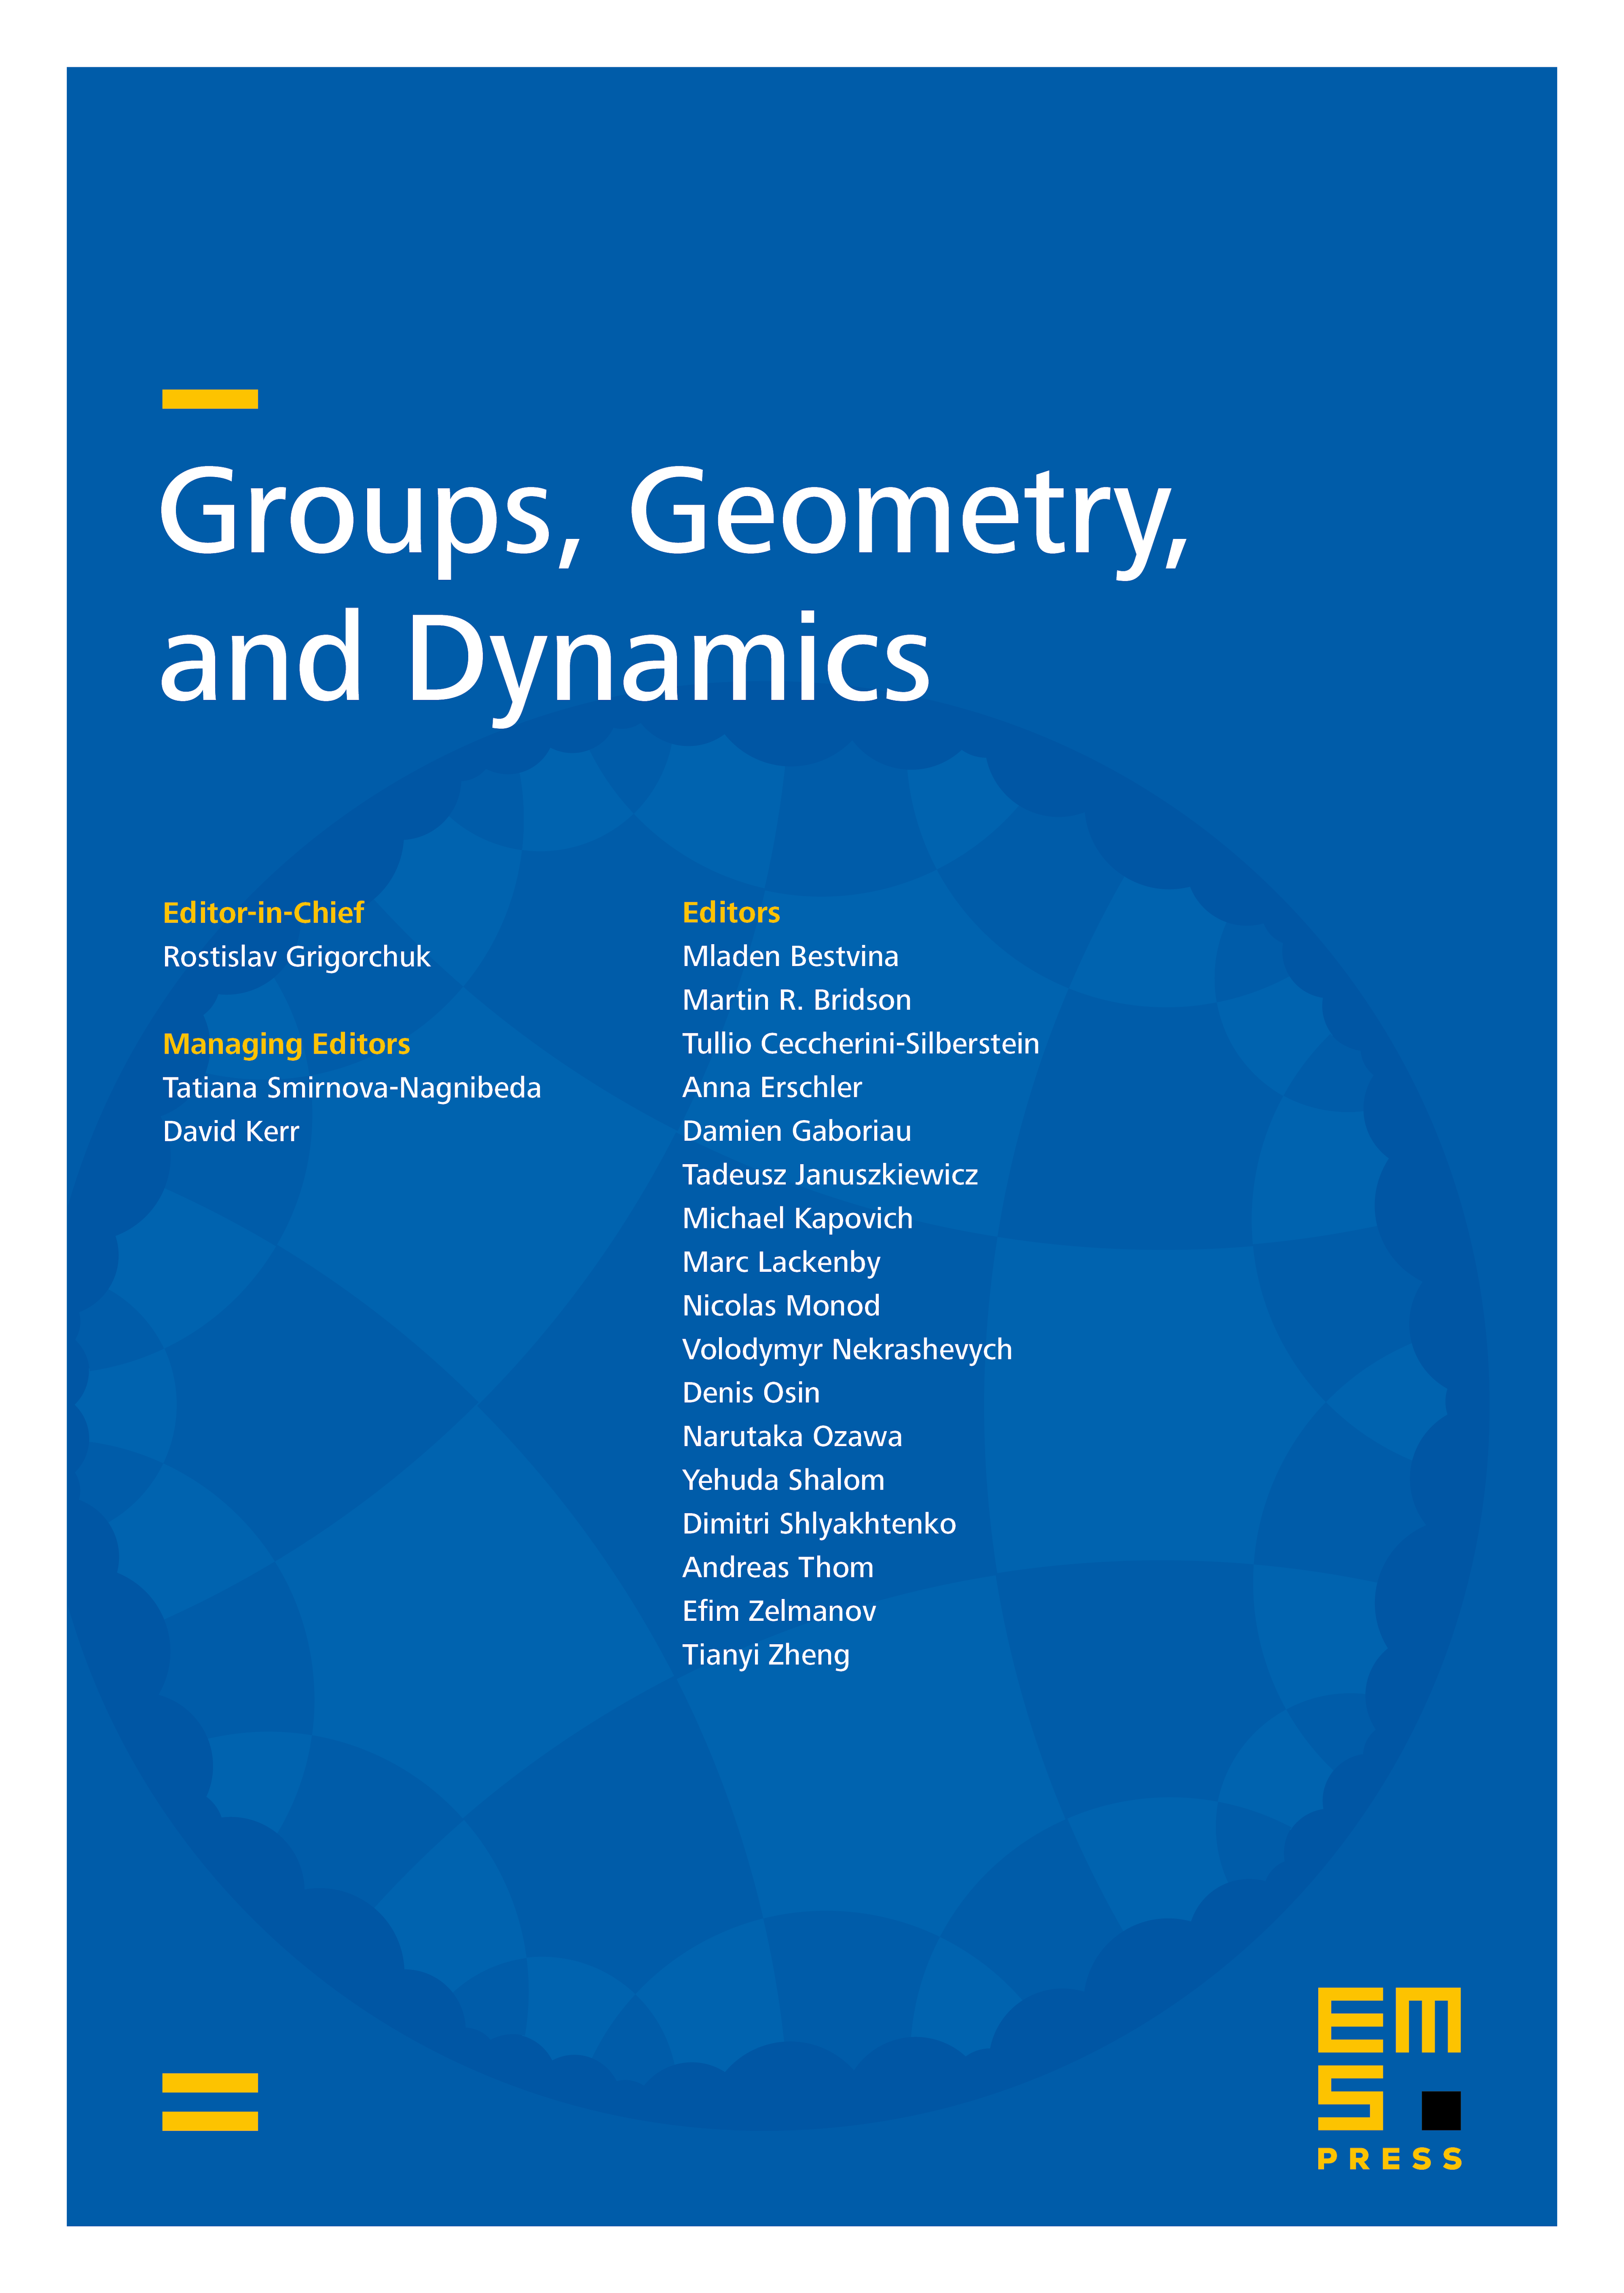 Coxeter group in Hilbert geometry cover